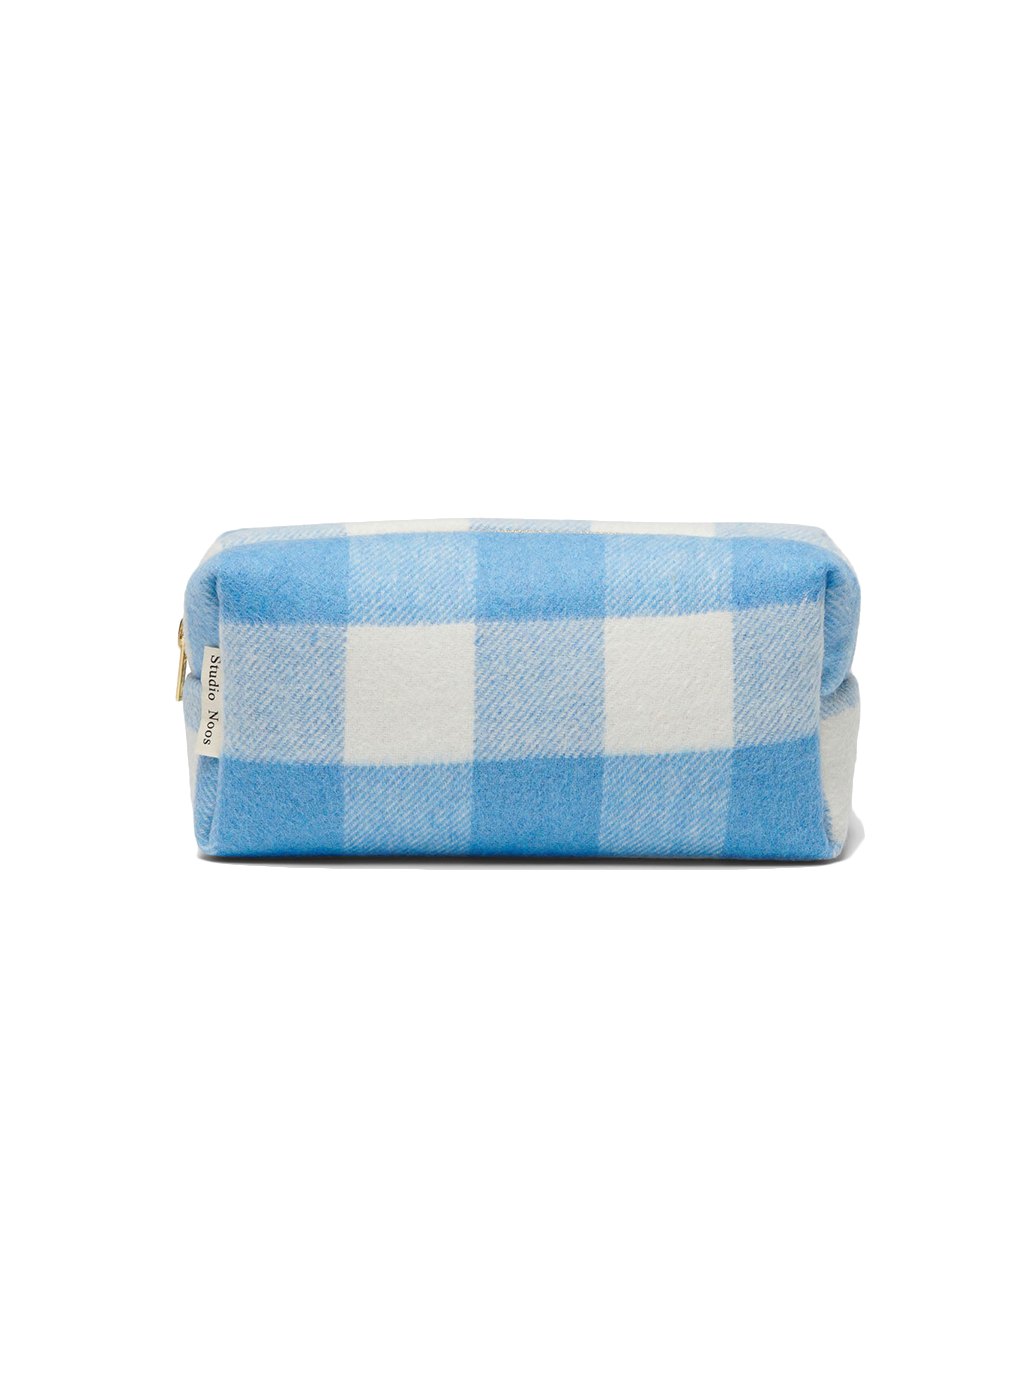 cosmetic bag / pencil case with a zipper